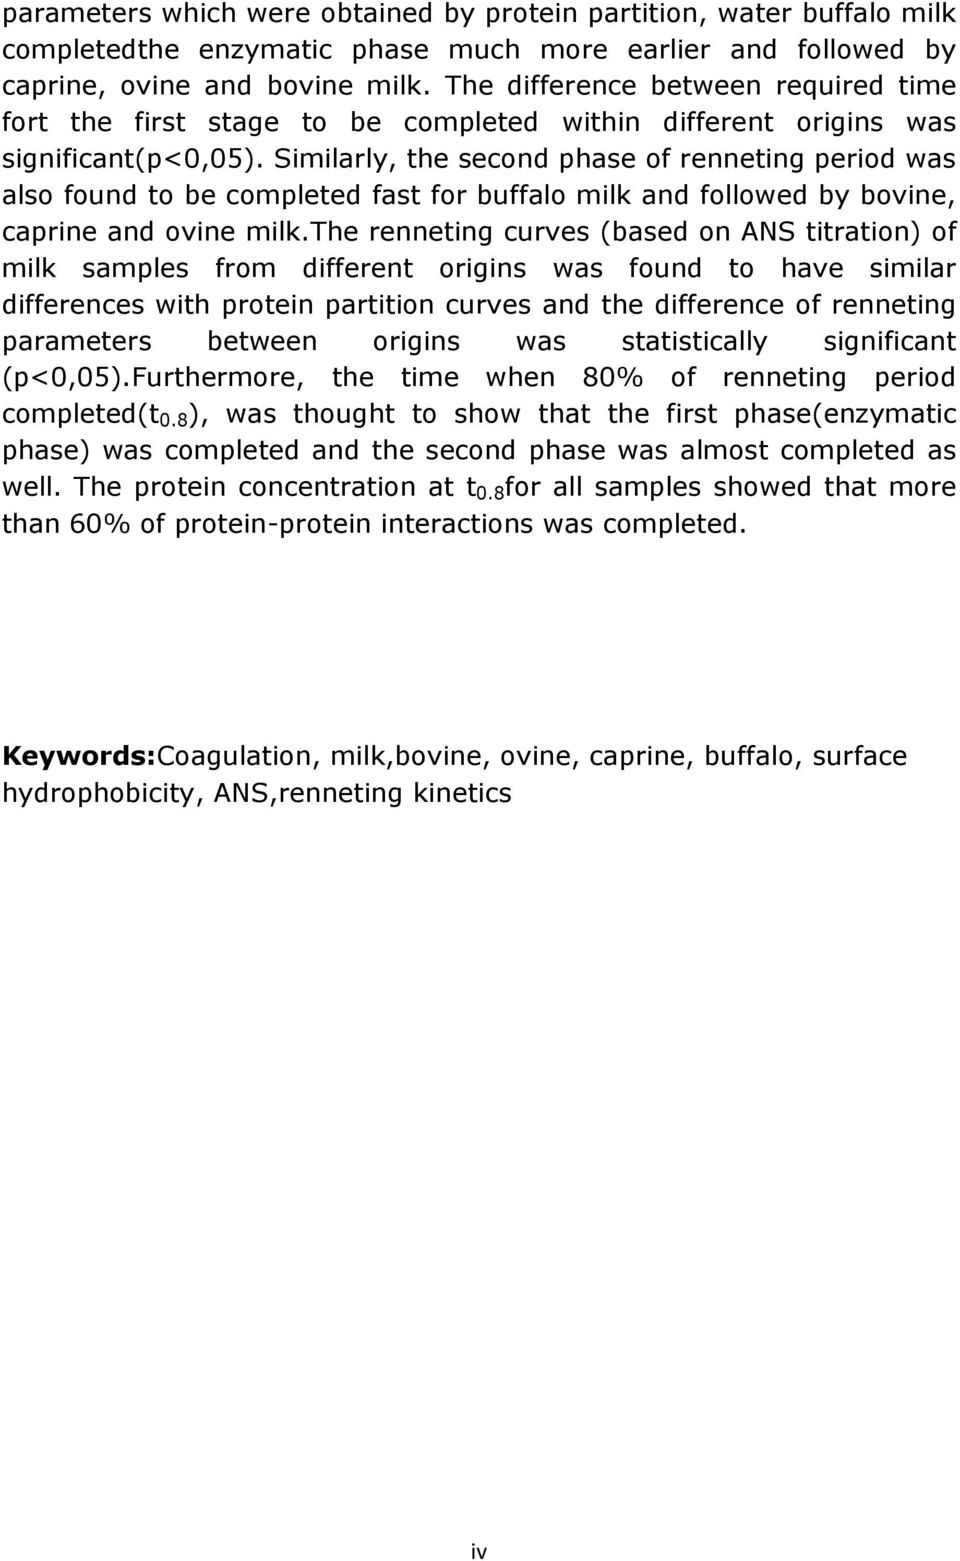 Similarly, the second phase of renneting period was also found to be completed fast for buffalo milk and followed by bovine, caprine and ovine milk.